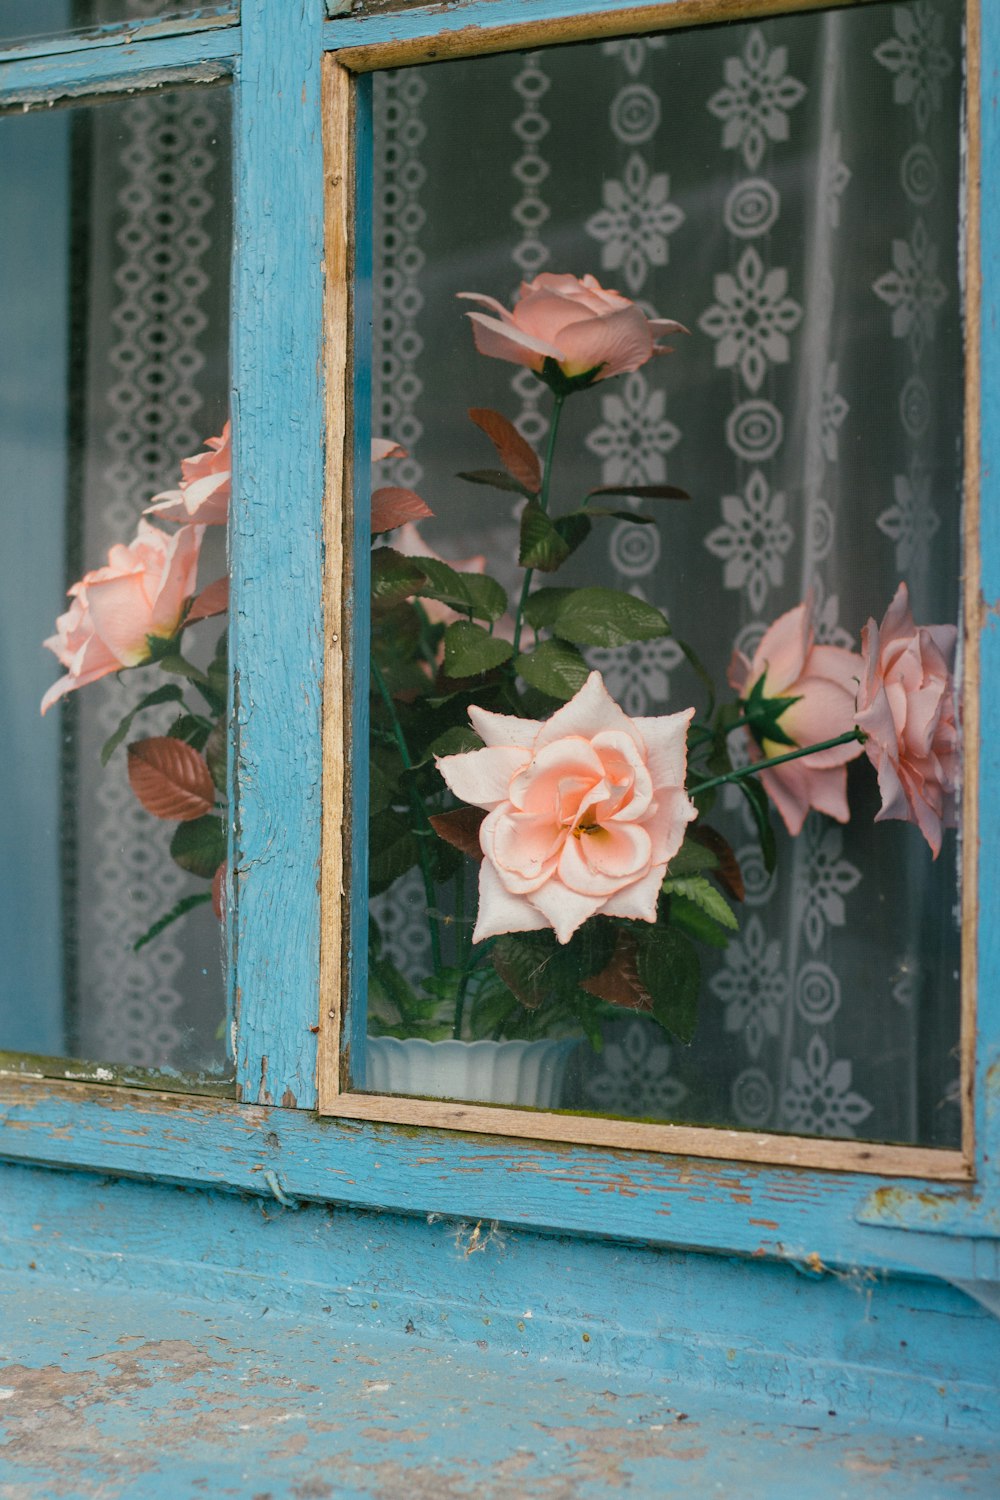 a vase of pink roses sitting in a window sill